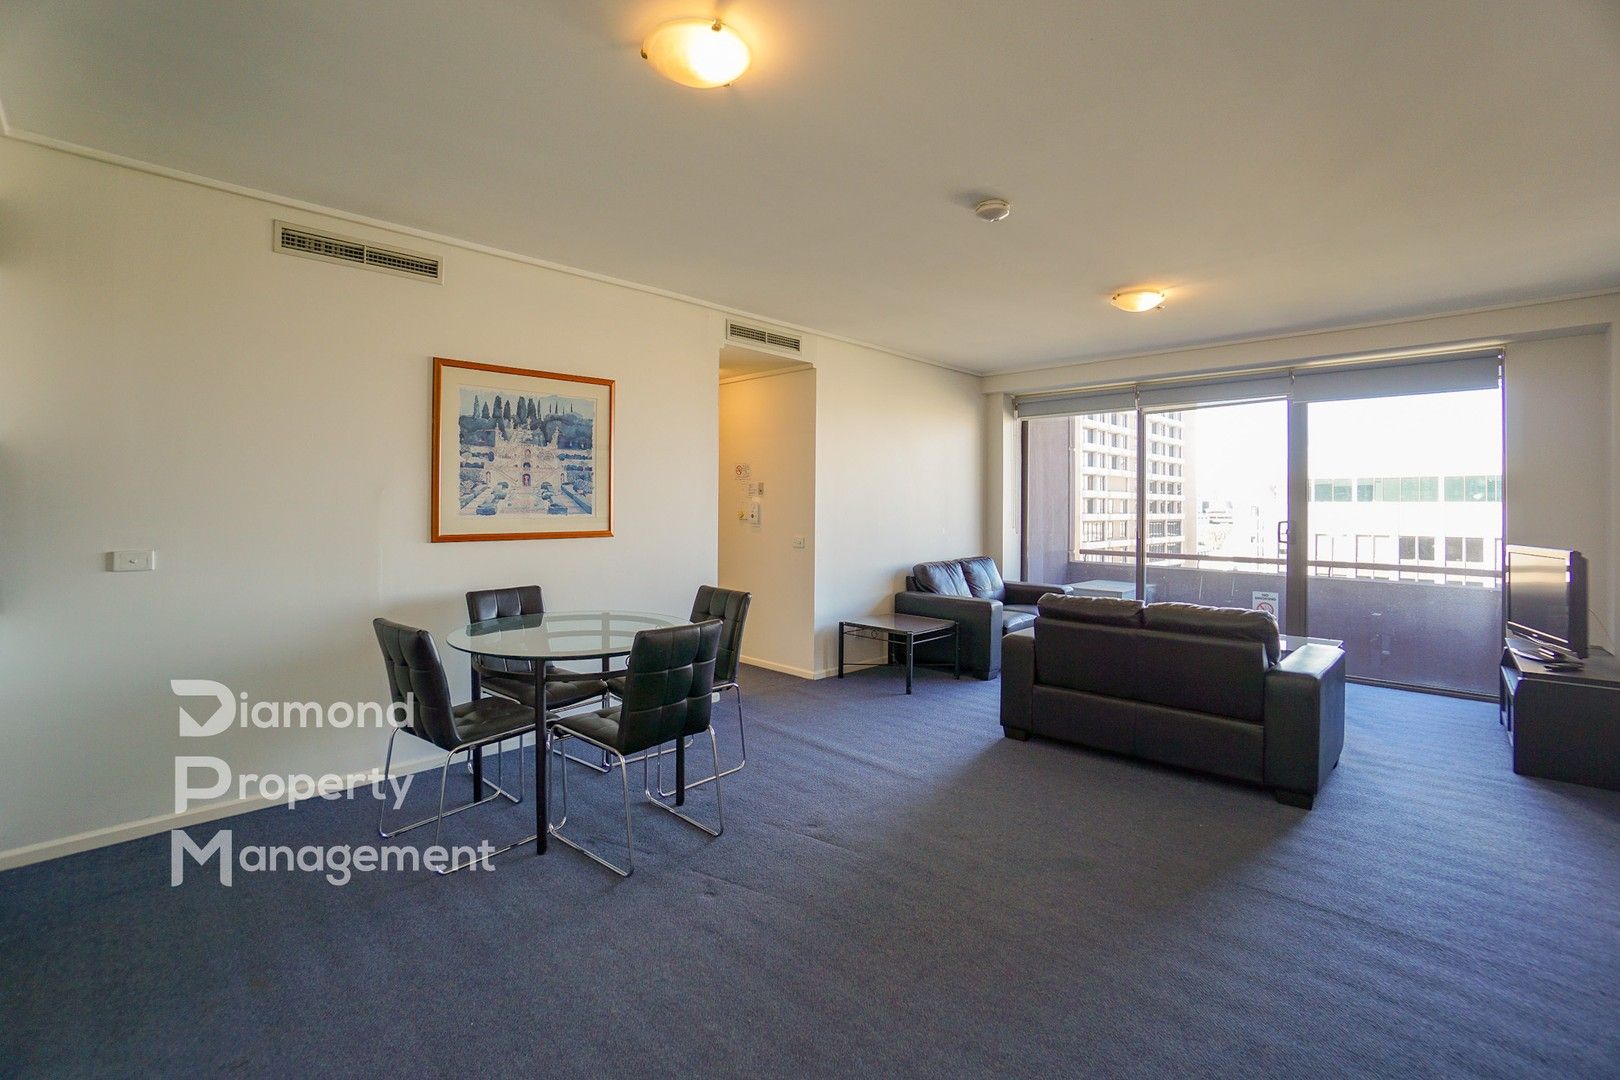 2 bedrooms Apartment / Unit / Flat in 1101/181 Exhibition Street MELBOURNE VIC, 3000